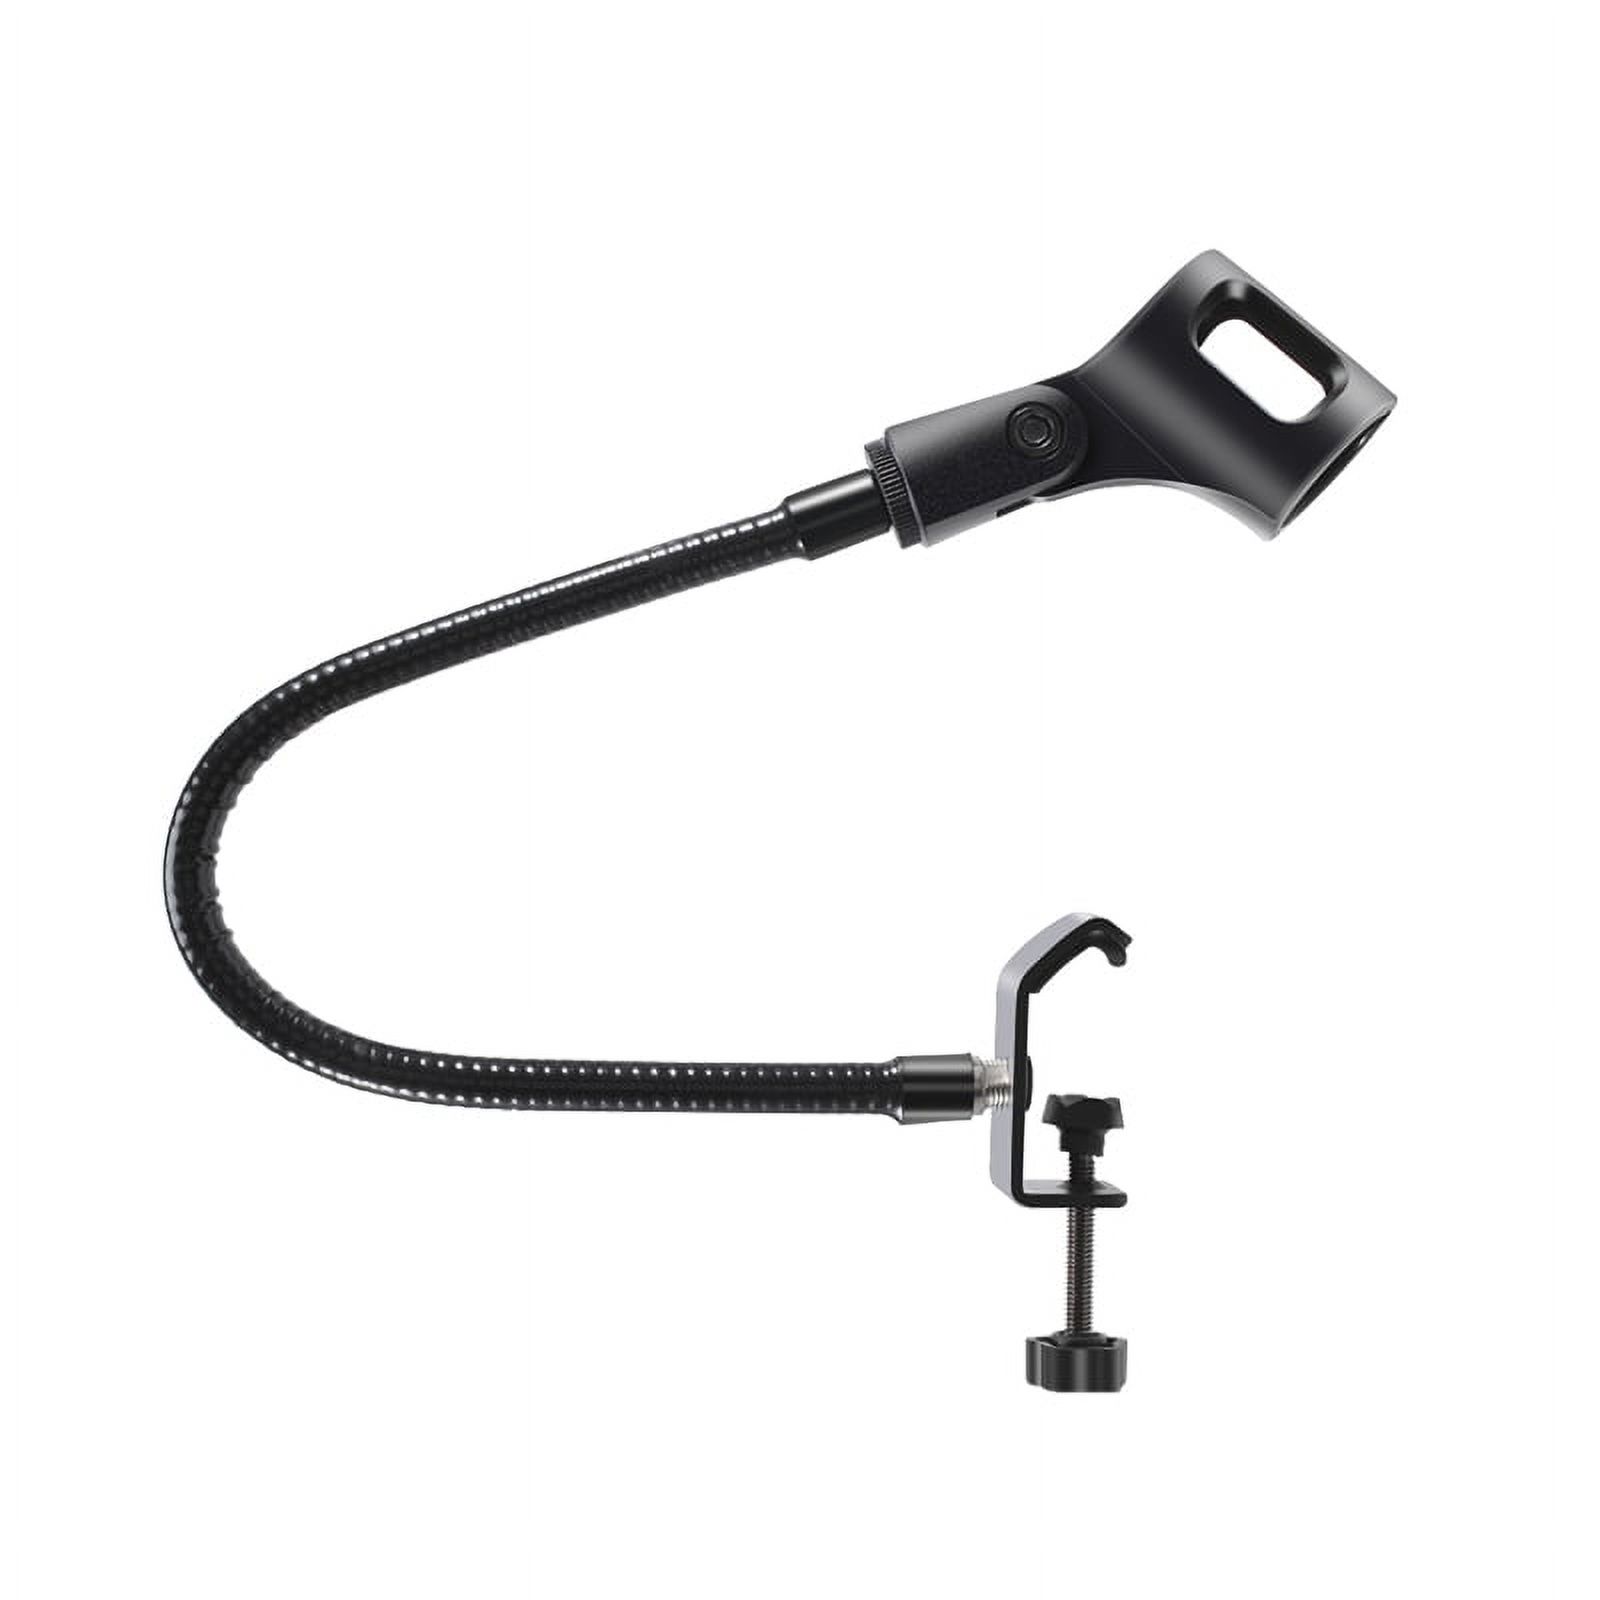 Microphone Stand Flexible Gooseneck Desk Clamp Holder Microphone Arm Recording Equipment for Meeting Lecture Podcast - image 1 of 6